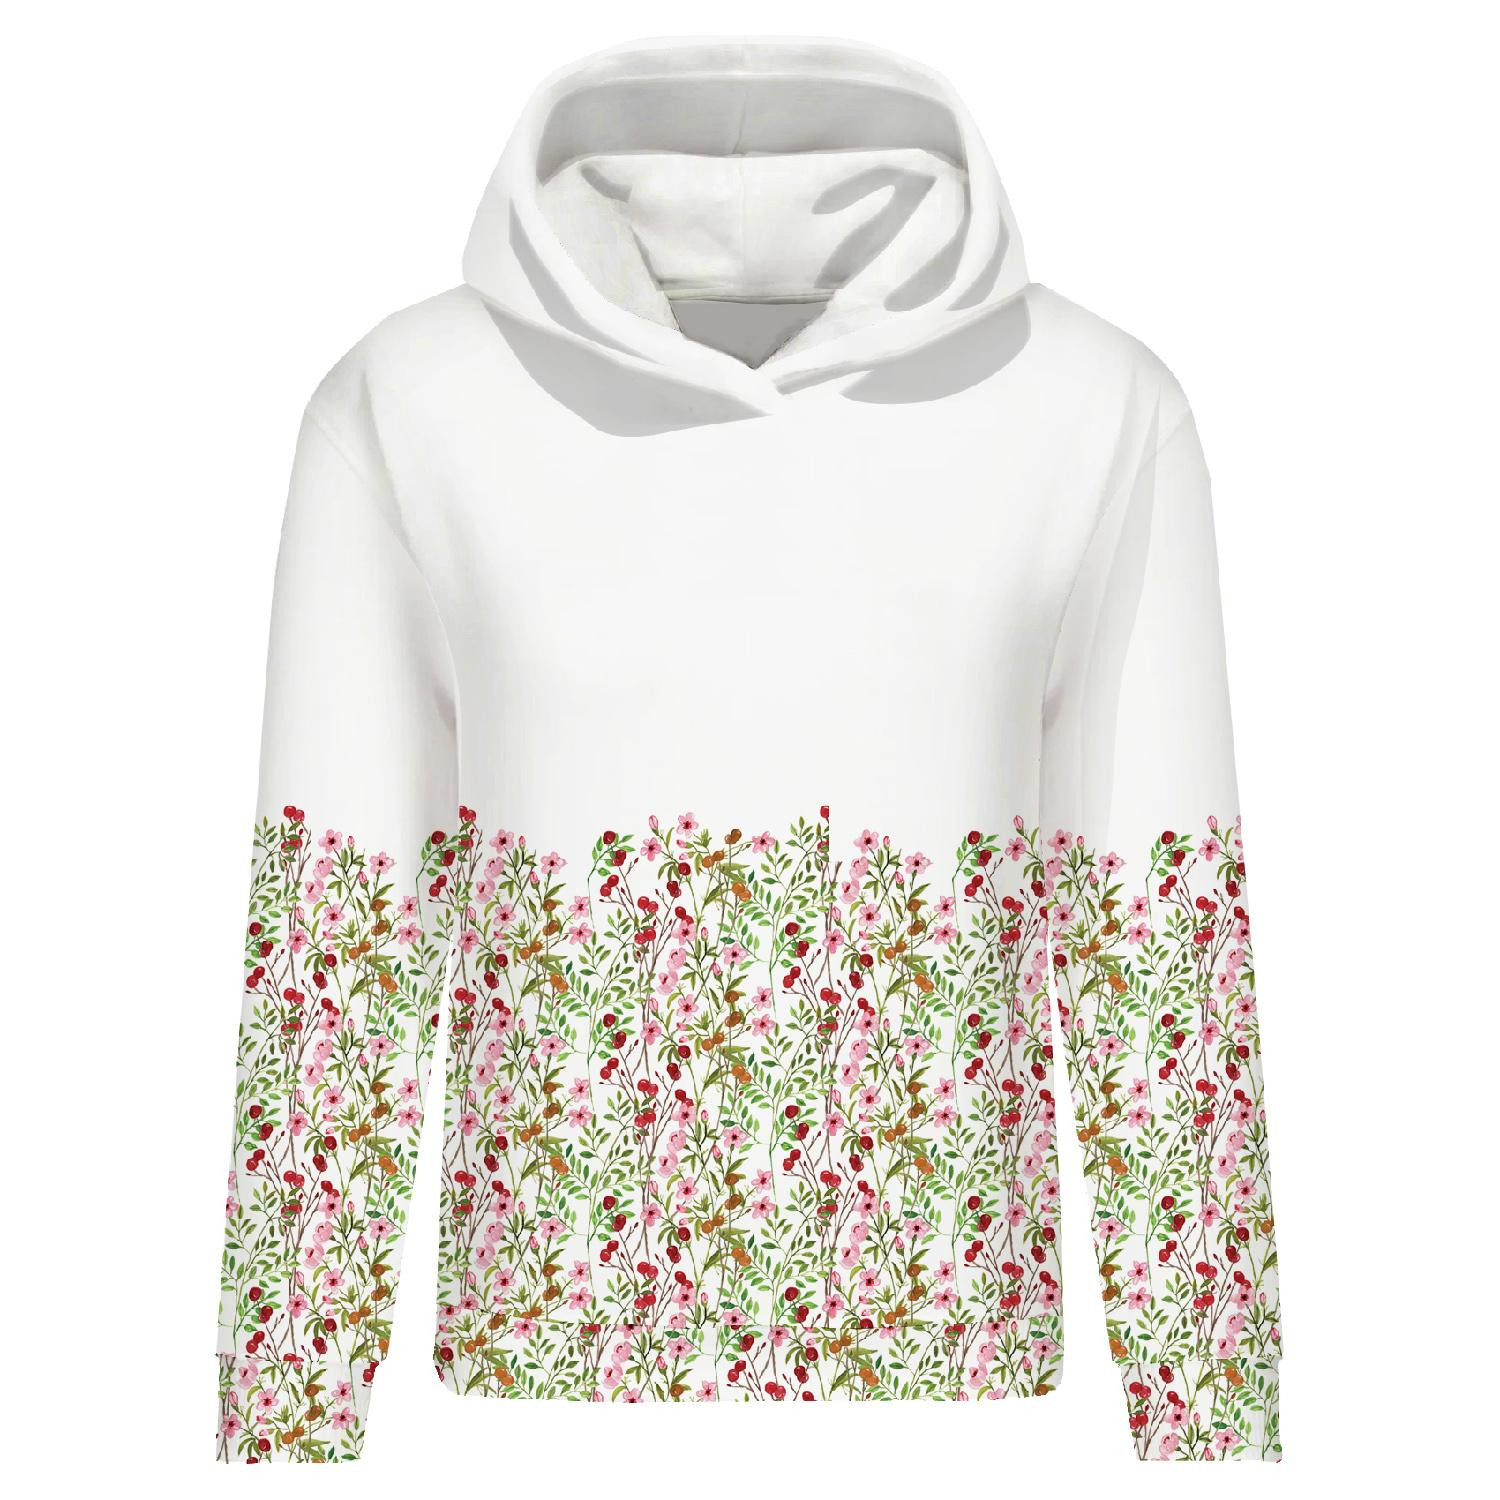 CLASSIC WOMEN’S HOODIE (POLA) - MEADOW PAT. 2 (IN THE MEADOW) - looped knit fabric 